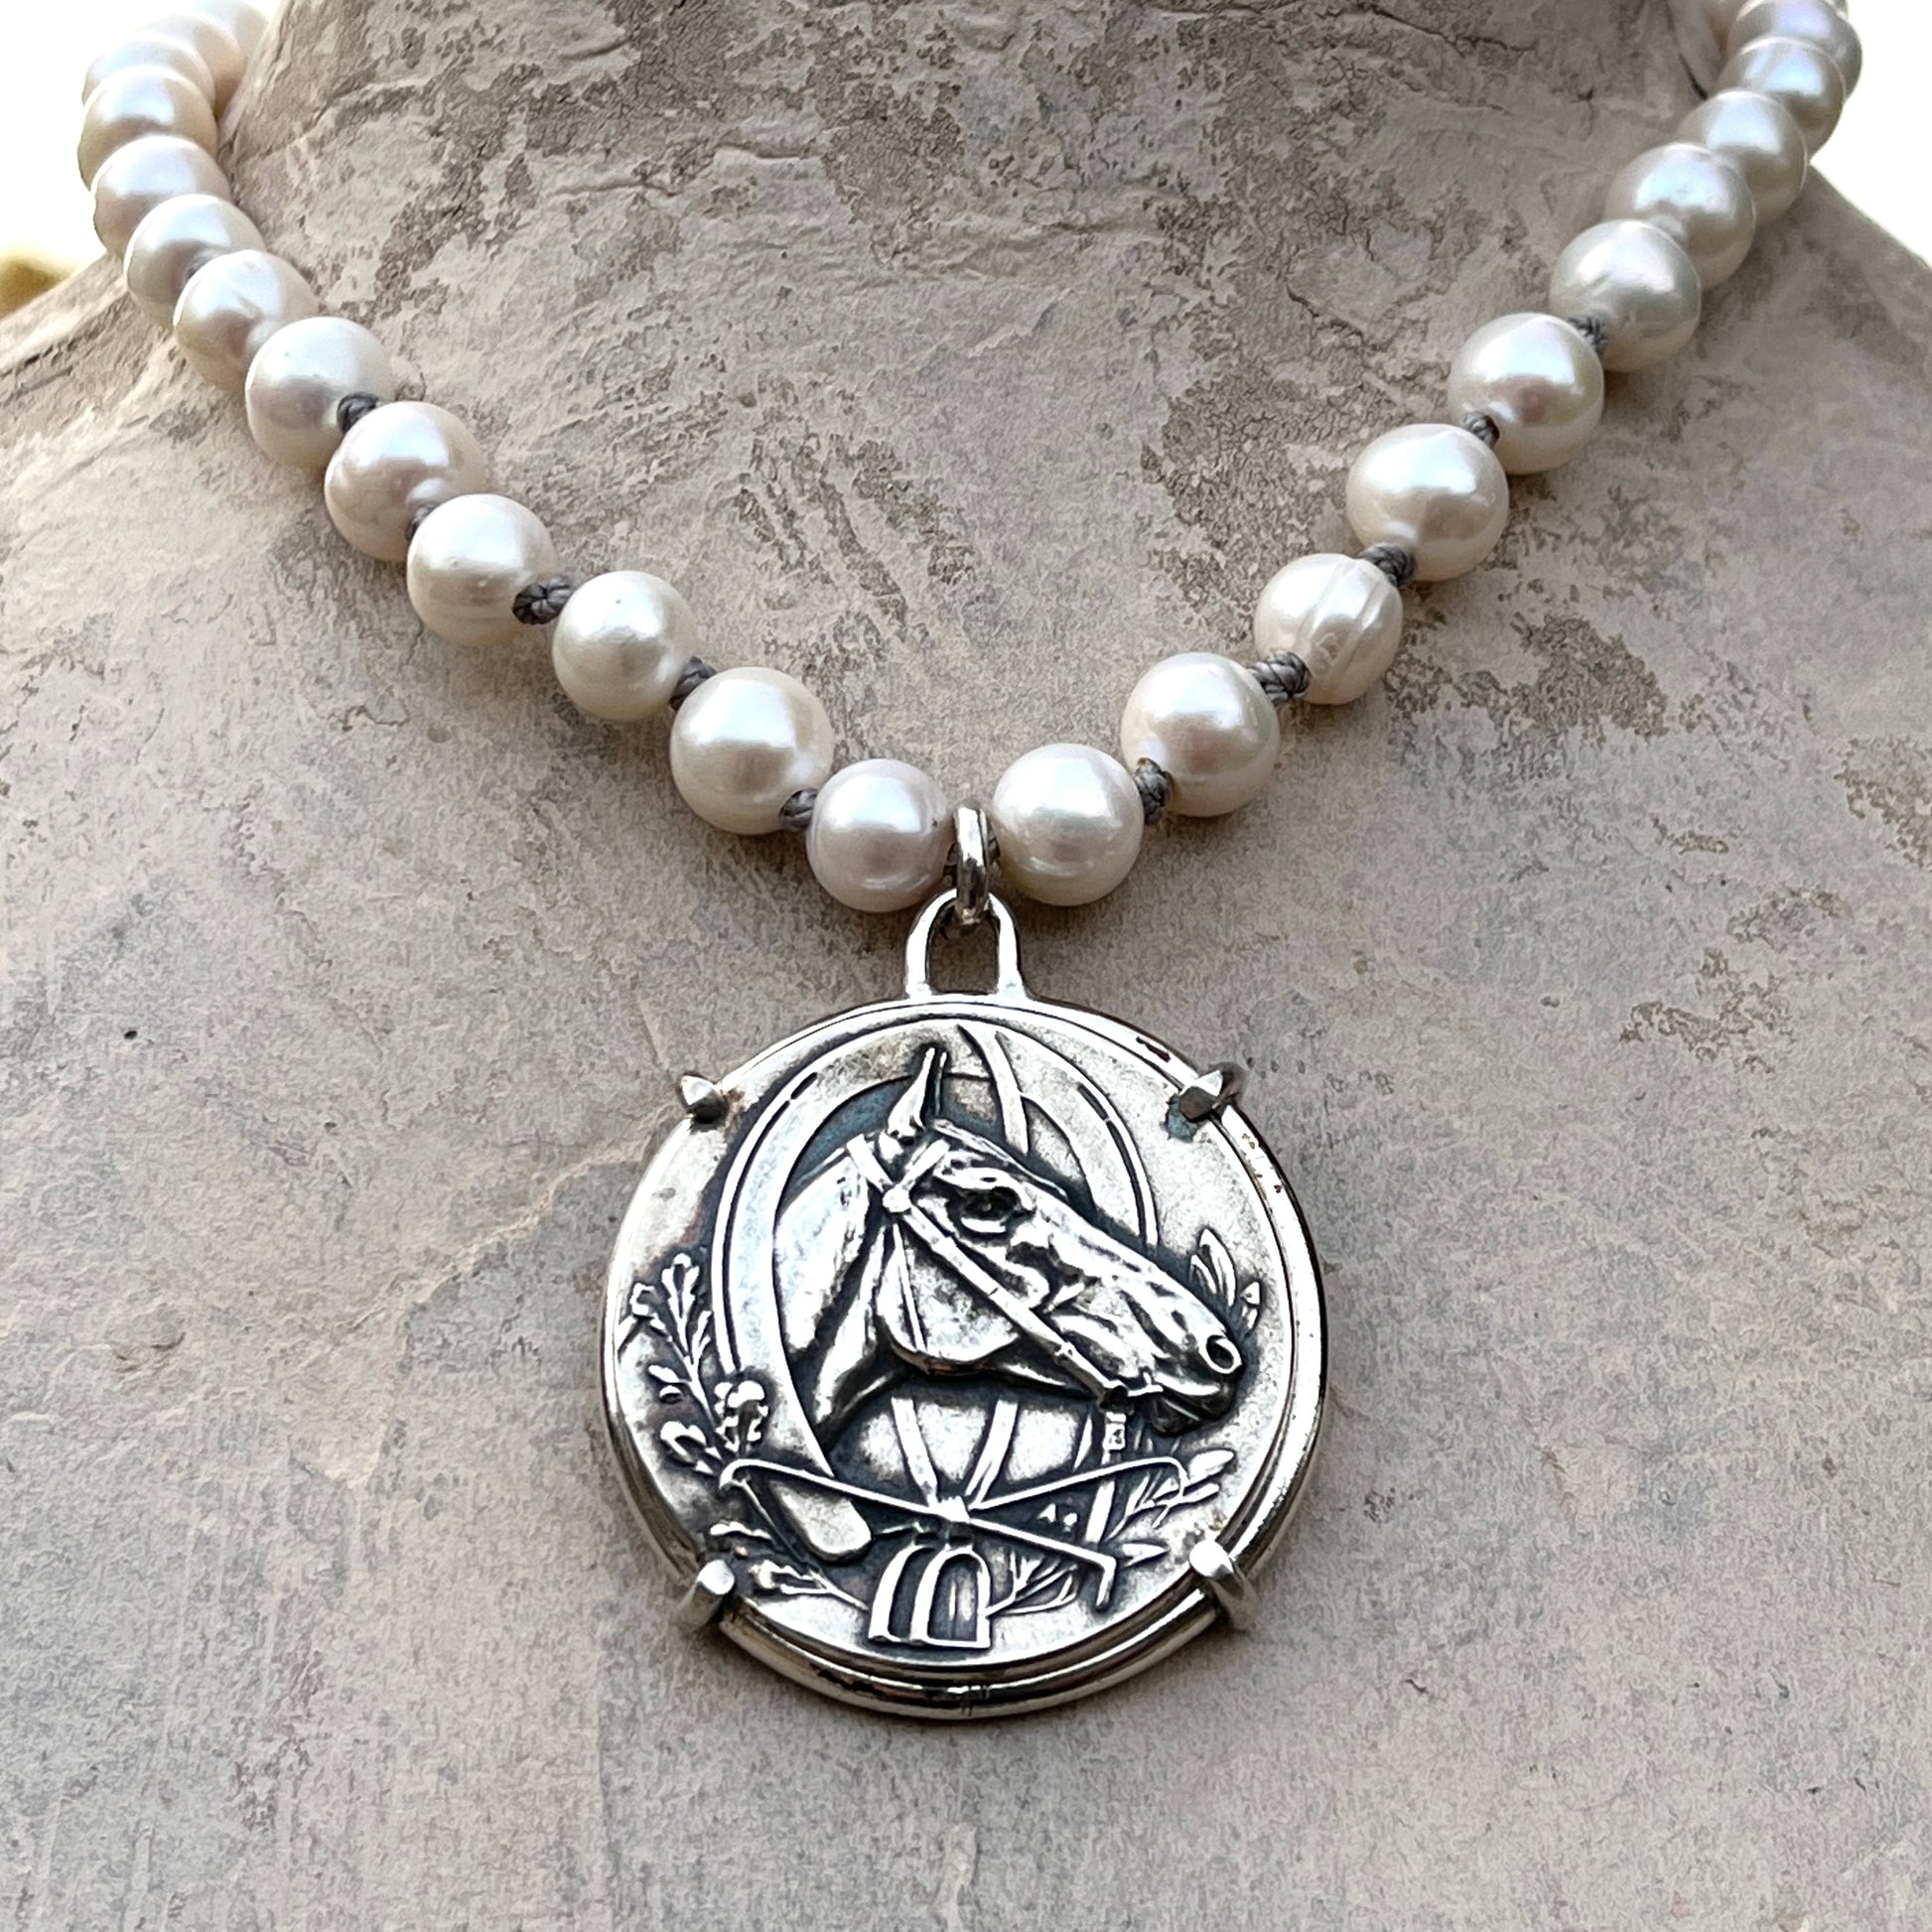 Dutch Horse Head Medal on Pearl Necklace